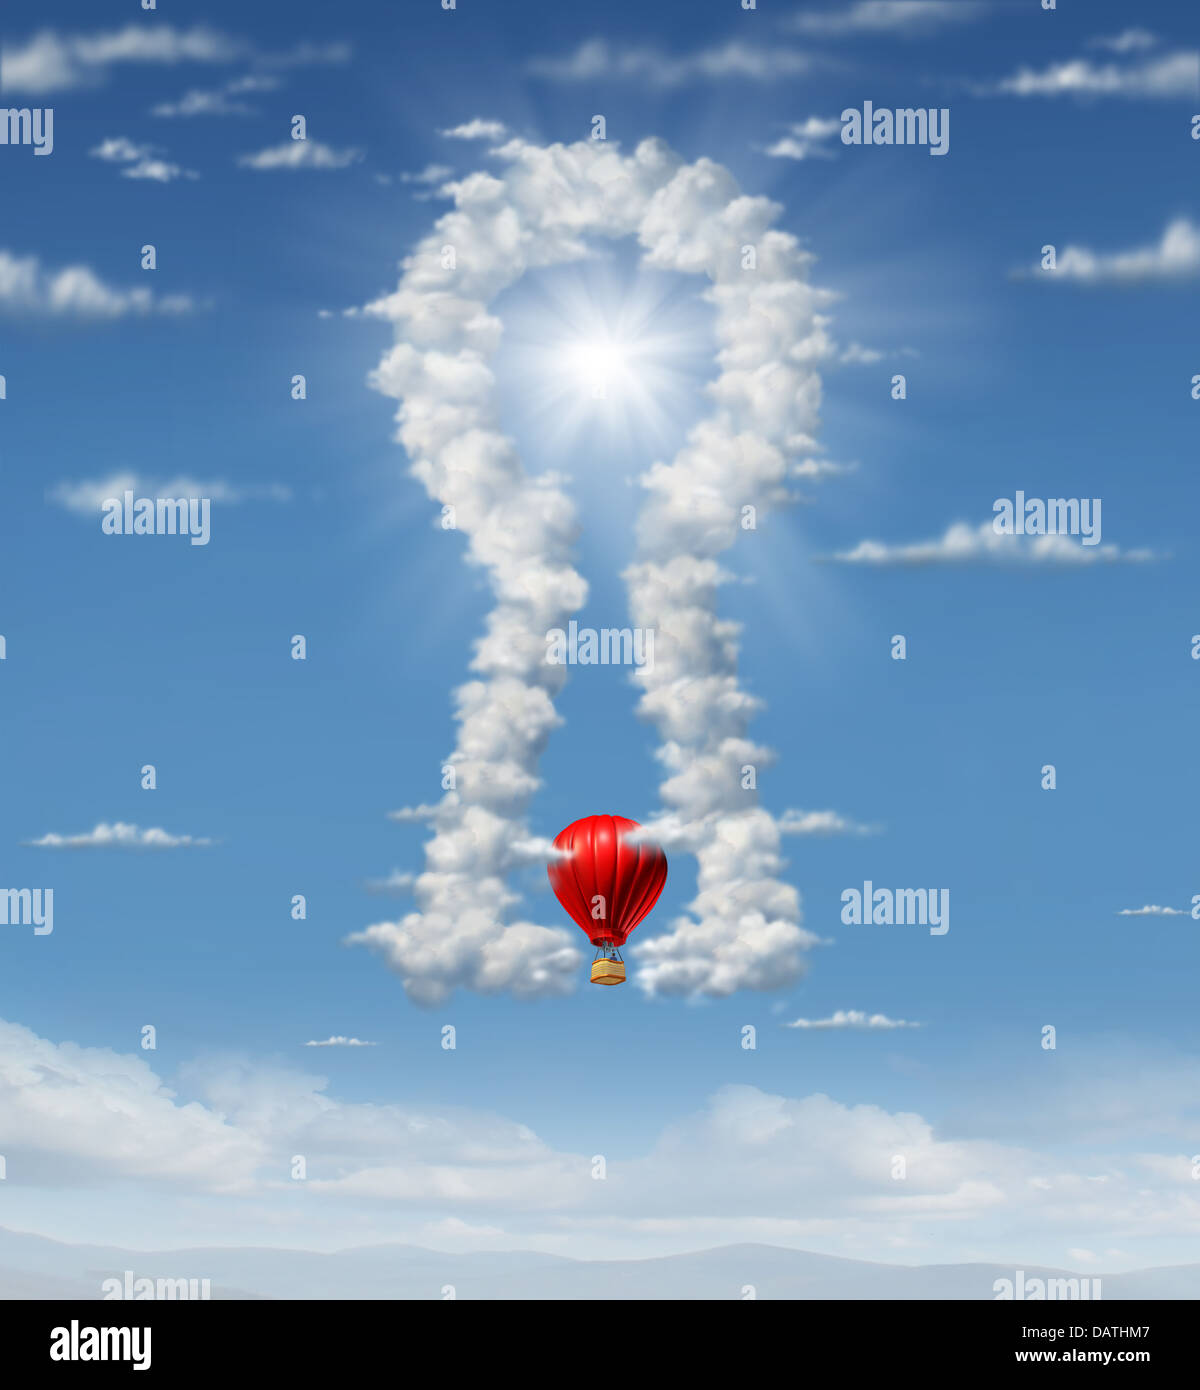 Finding the answer with a group of clouds in the sky in the shape of a key hole as a business concept with a red hot air balloon flying up towards the glowing sun target as an icon of ideas and inspiration. Stock Photo